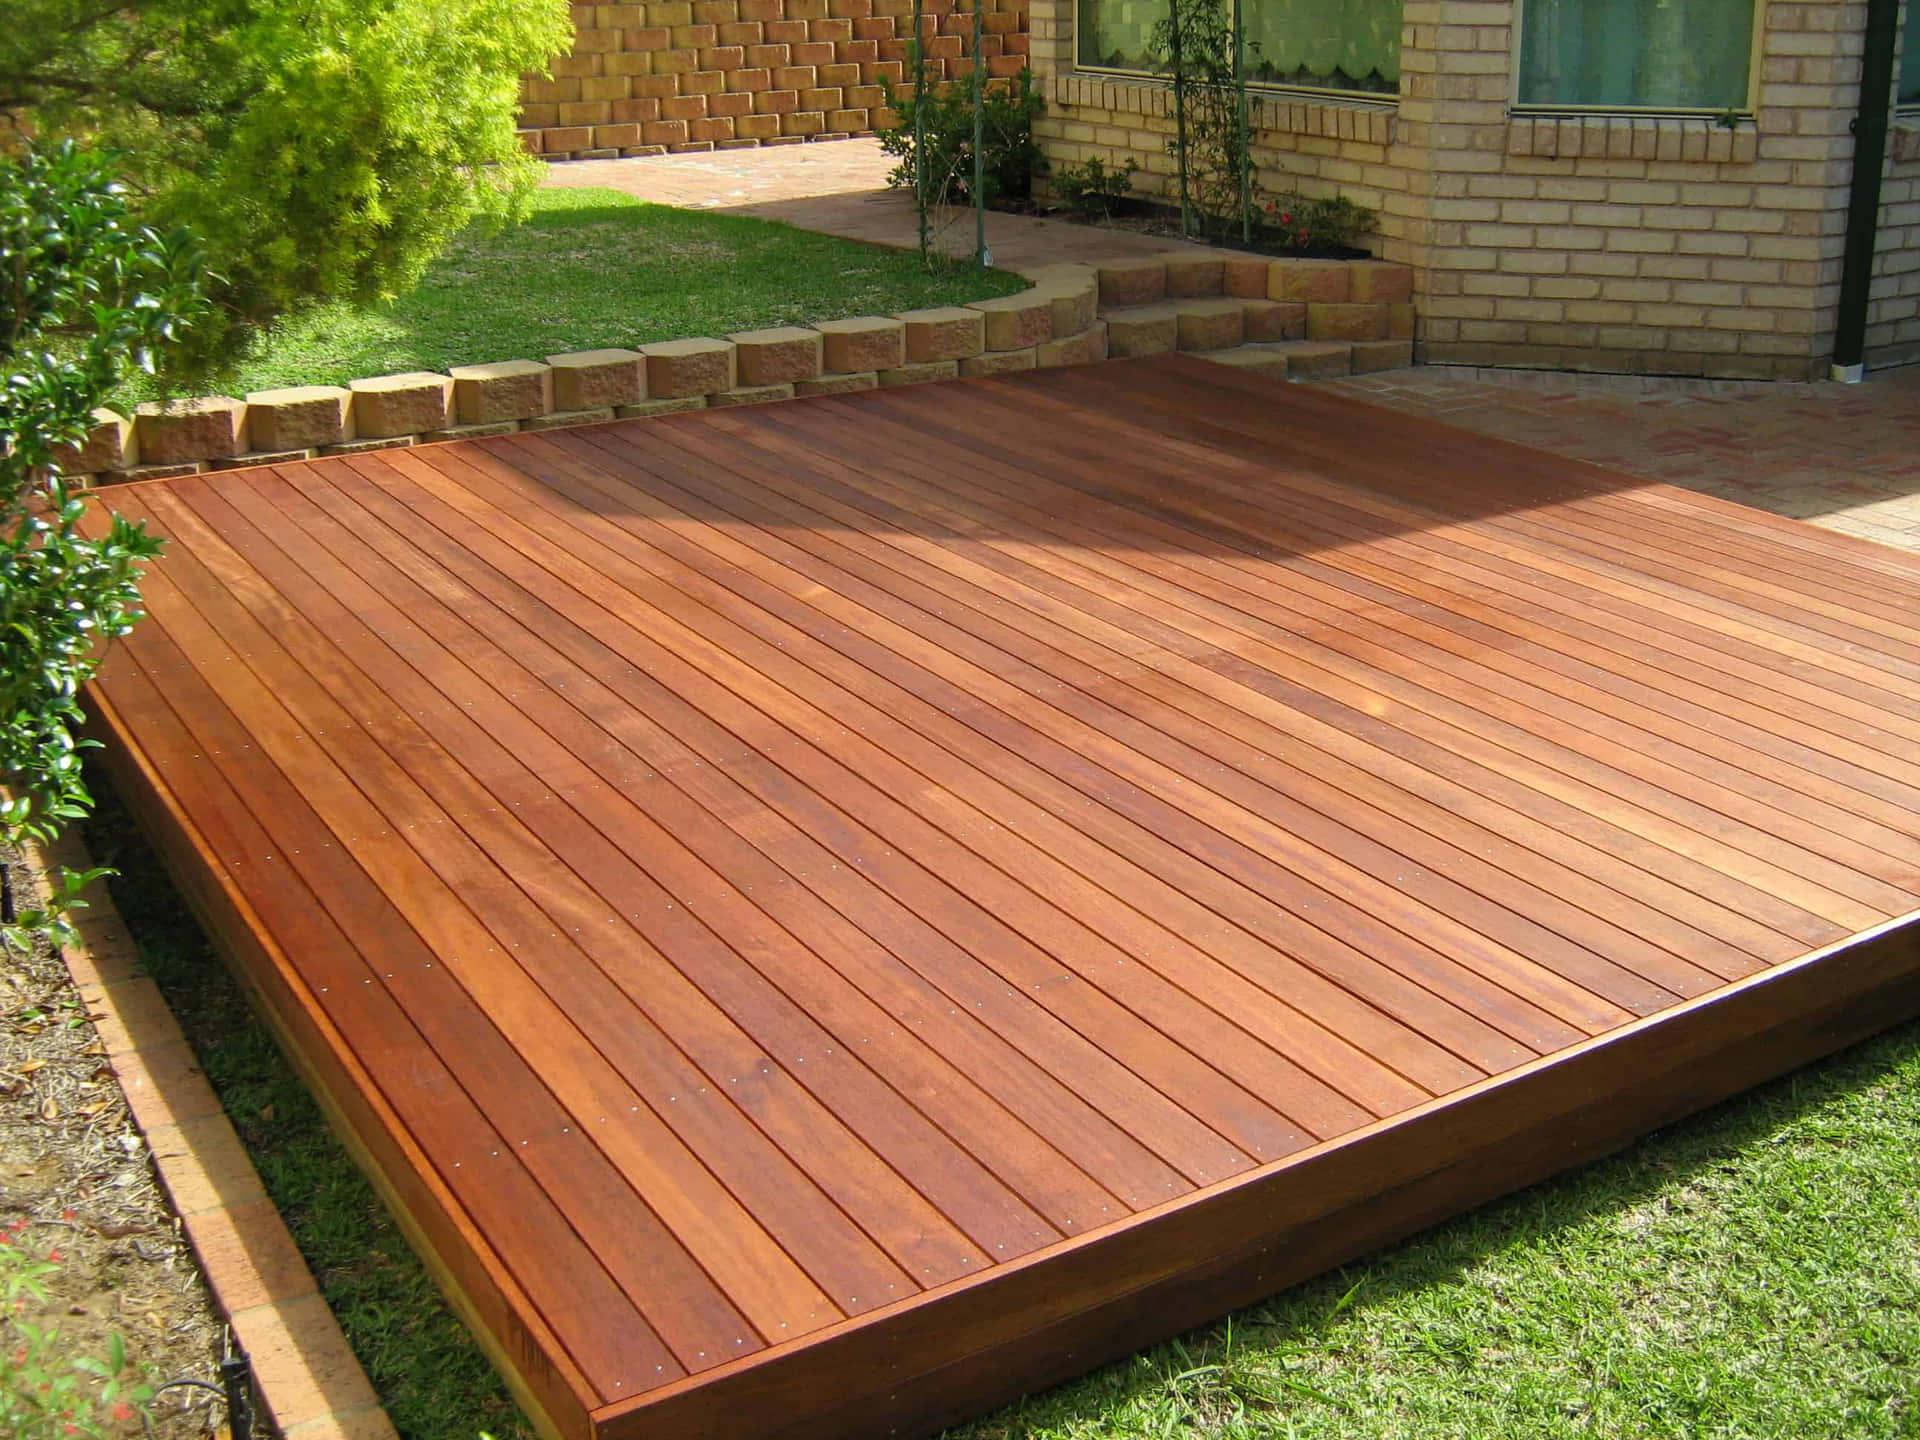 Stylish Wooden Deck with Outdoor Seating Area